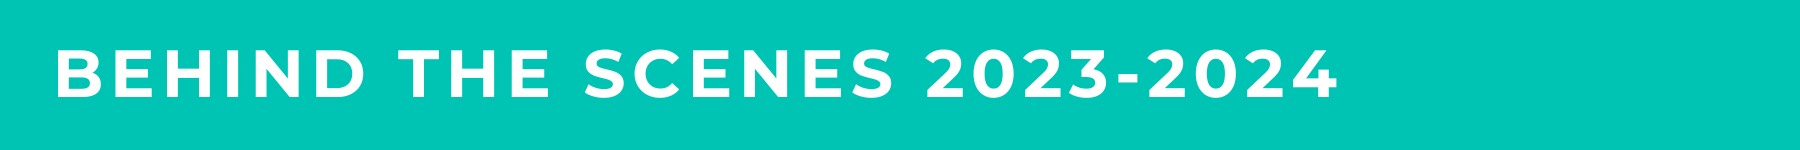 "Behind the Scenes 2023-2024" banner - white text on teal background